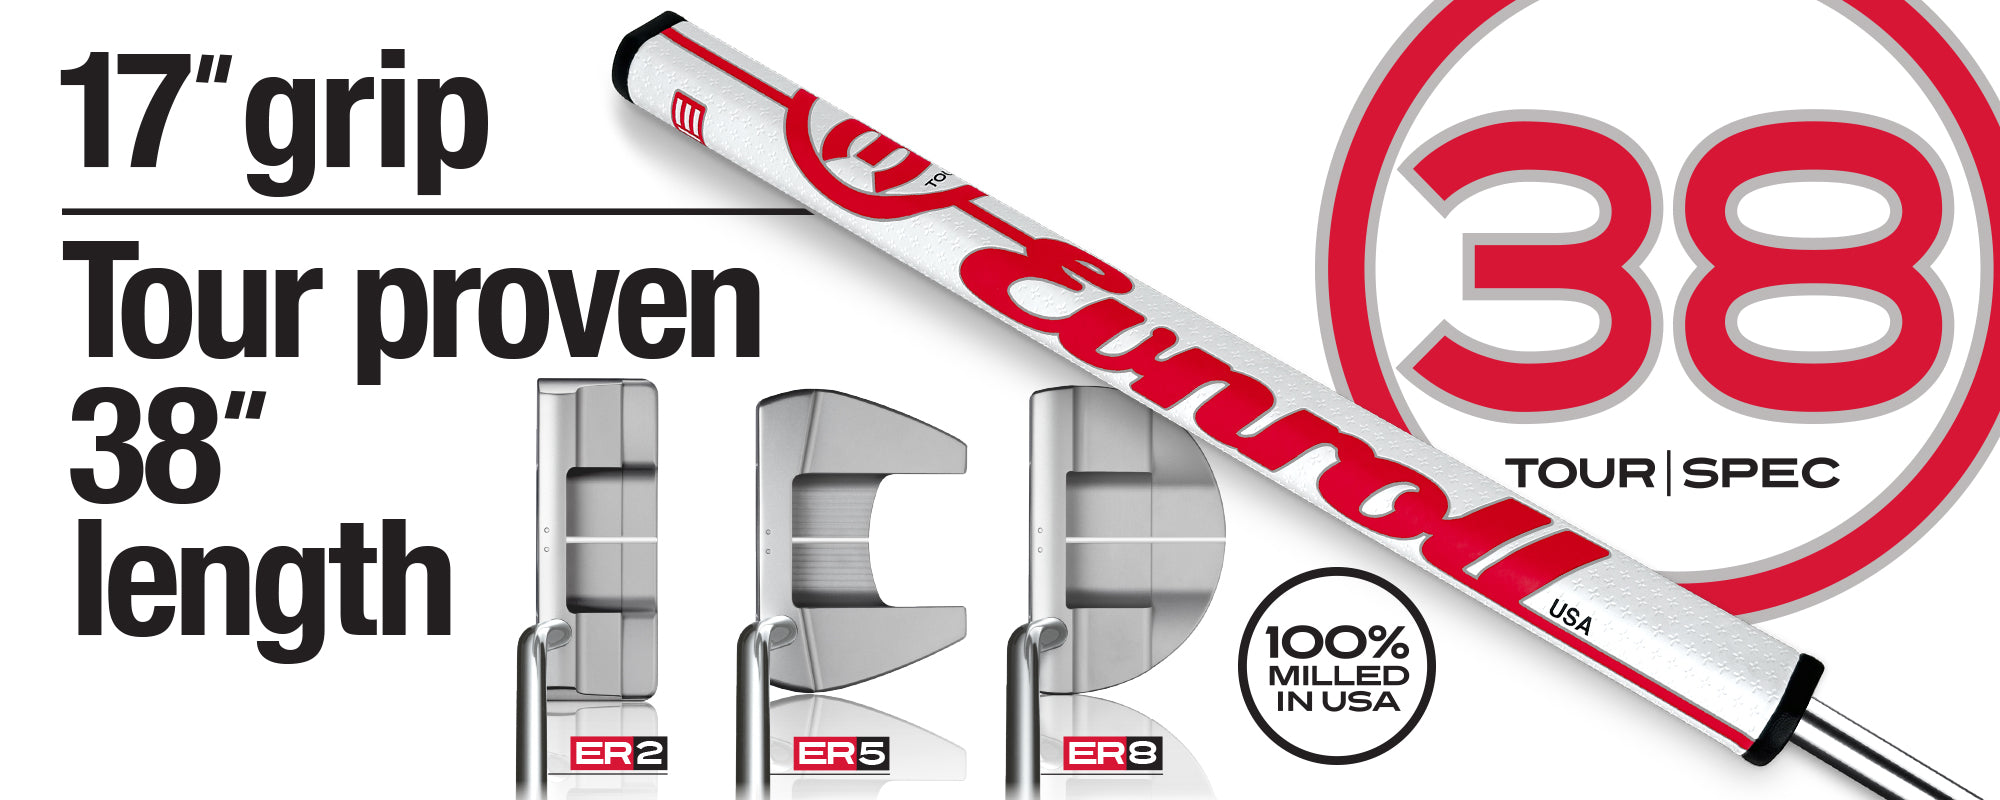 winning never gets old. In 10+ years of testing, i've never seen a putter dominate like this - mygolfspy 2024 most wanted blade putter - Evnroll Neo Classic ER2